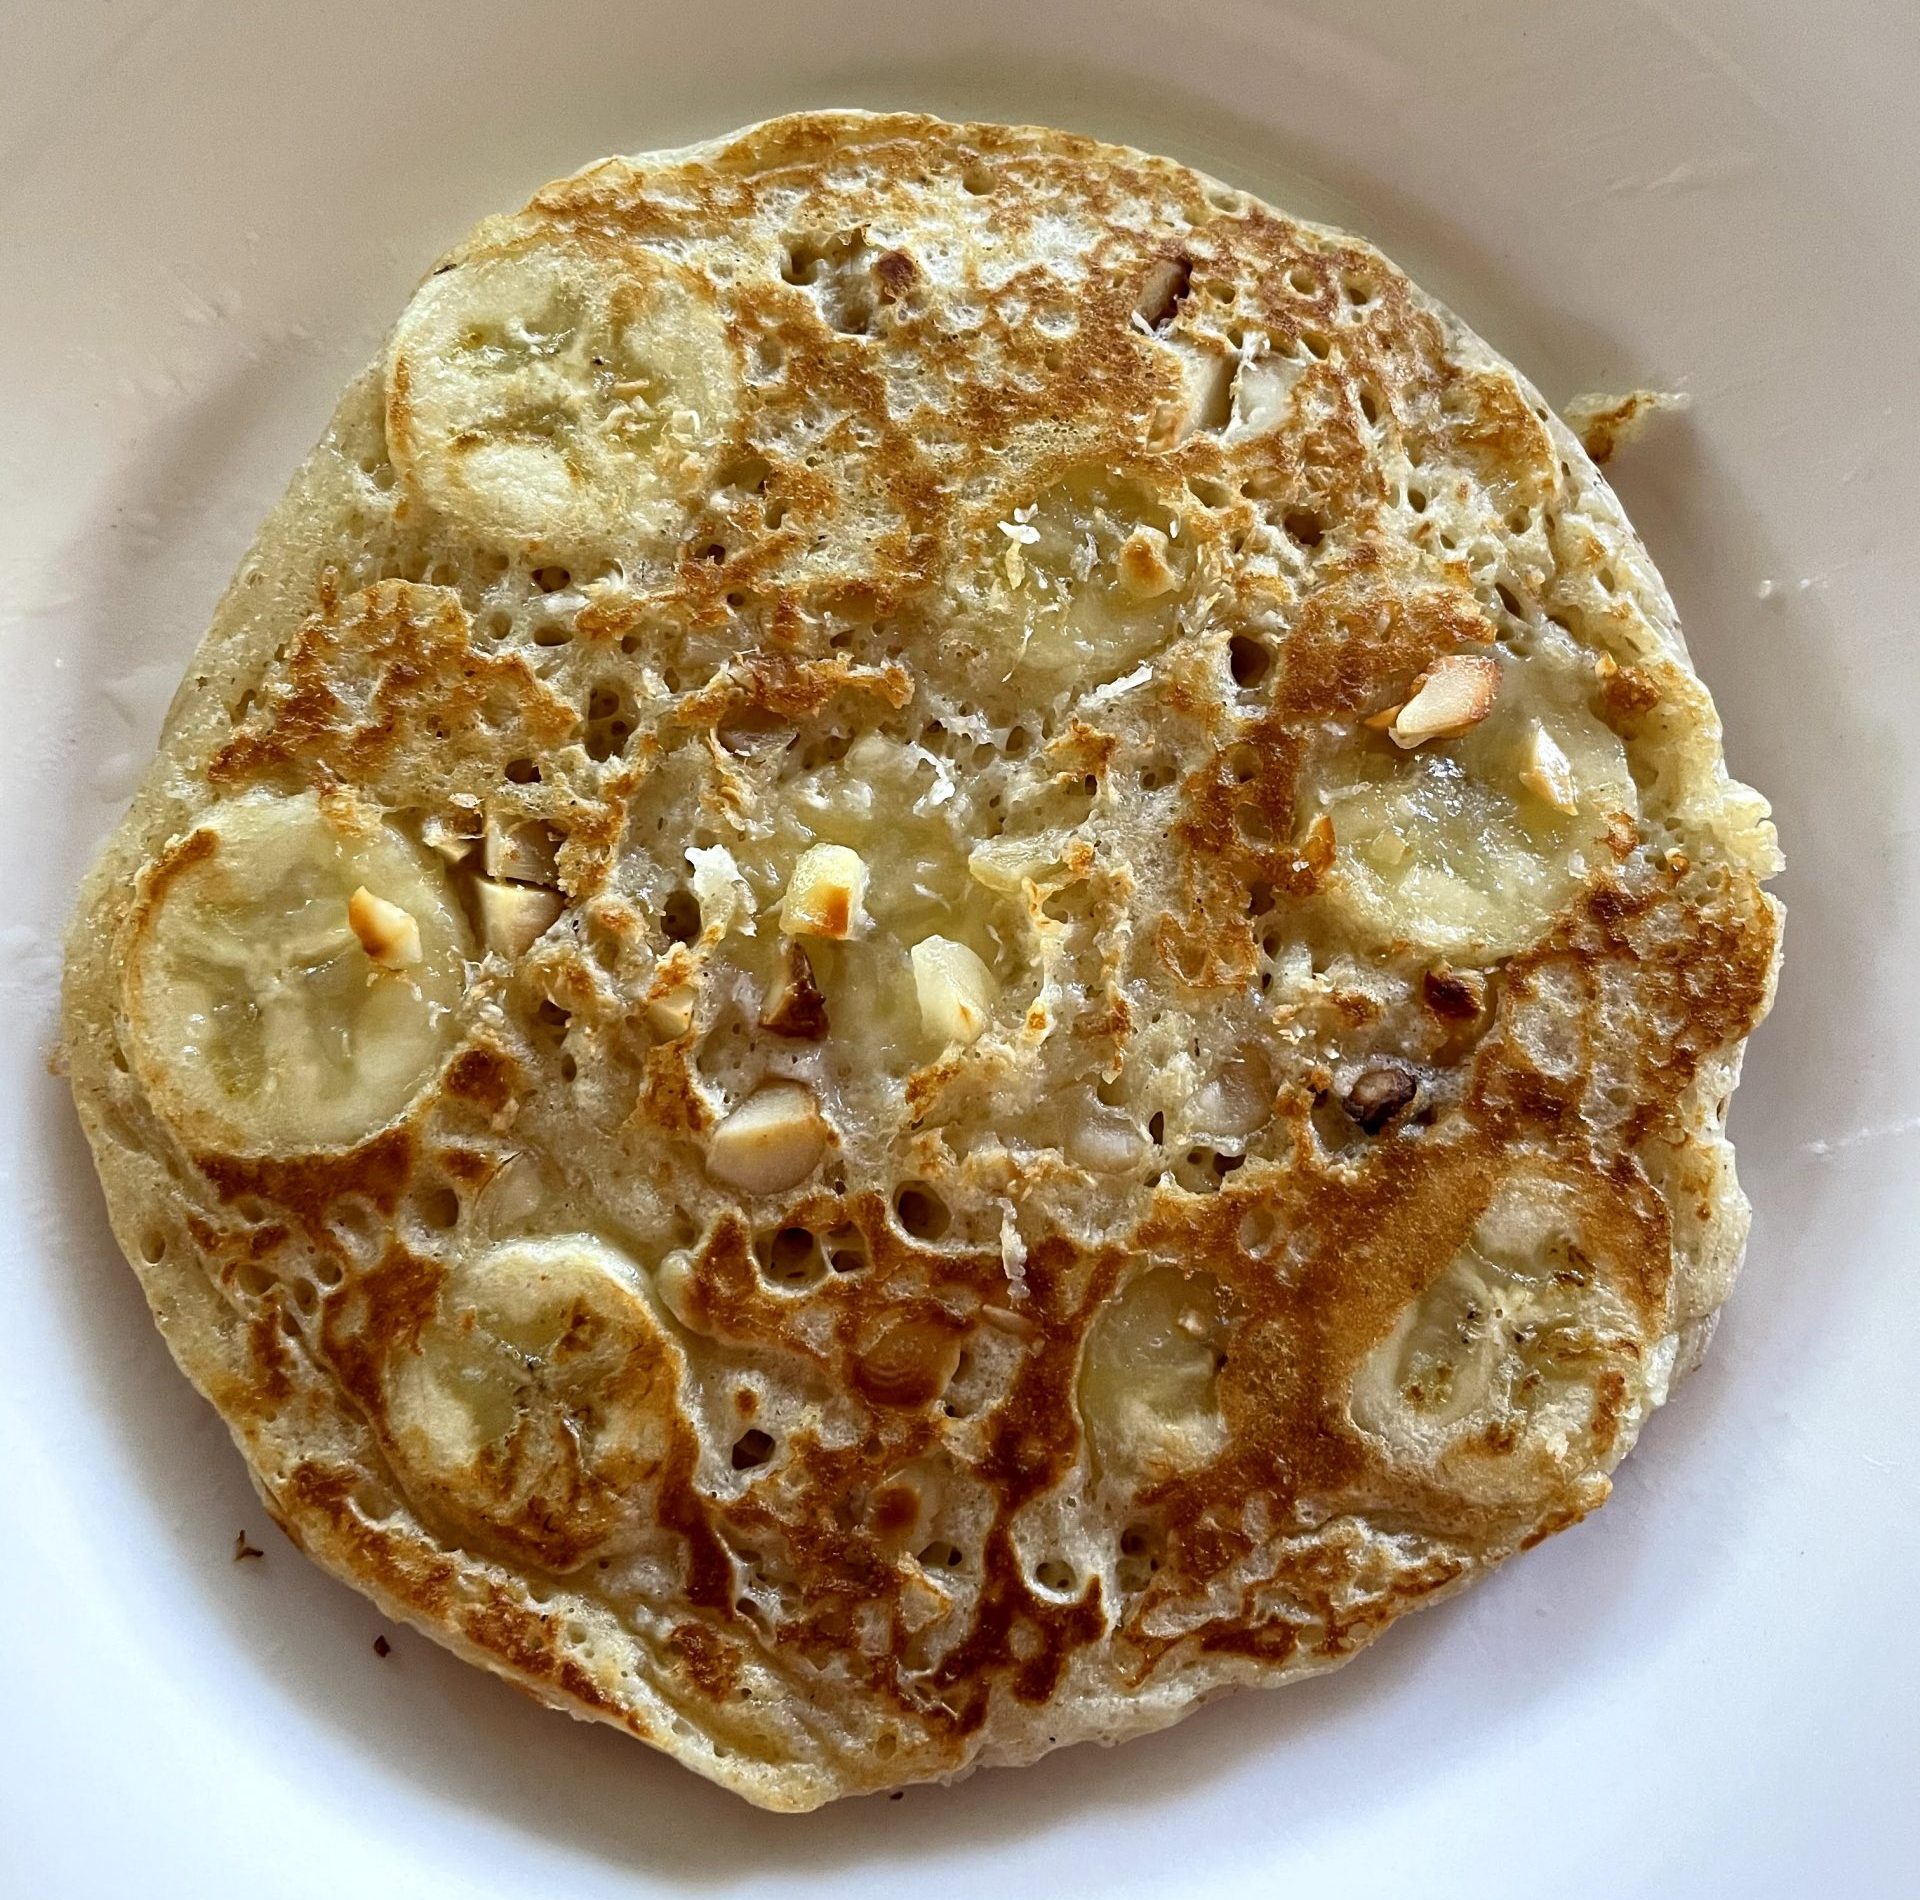 Cooked pancake with caramelized banana, macadamia nuts and coconut.